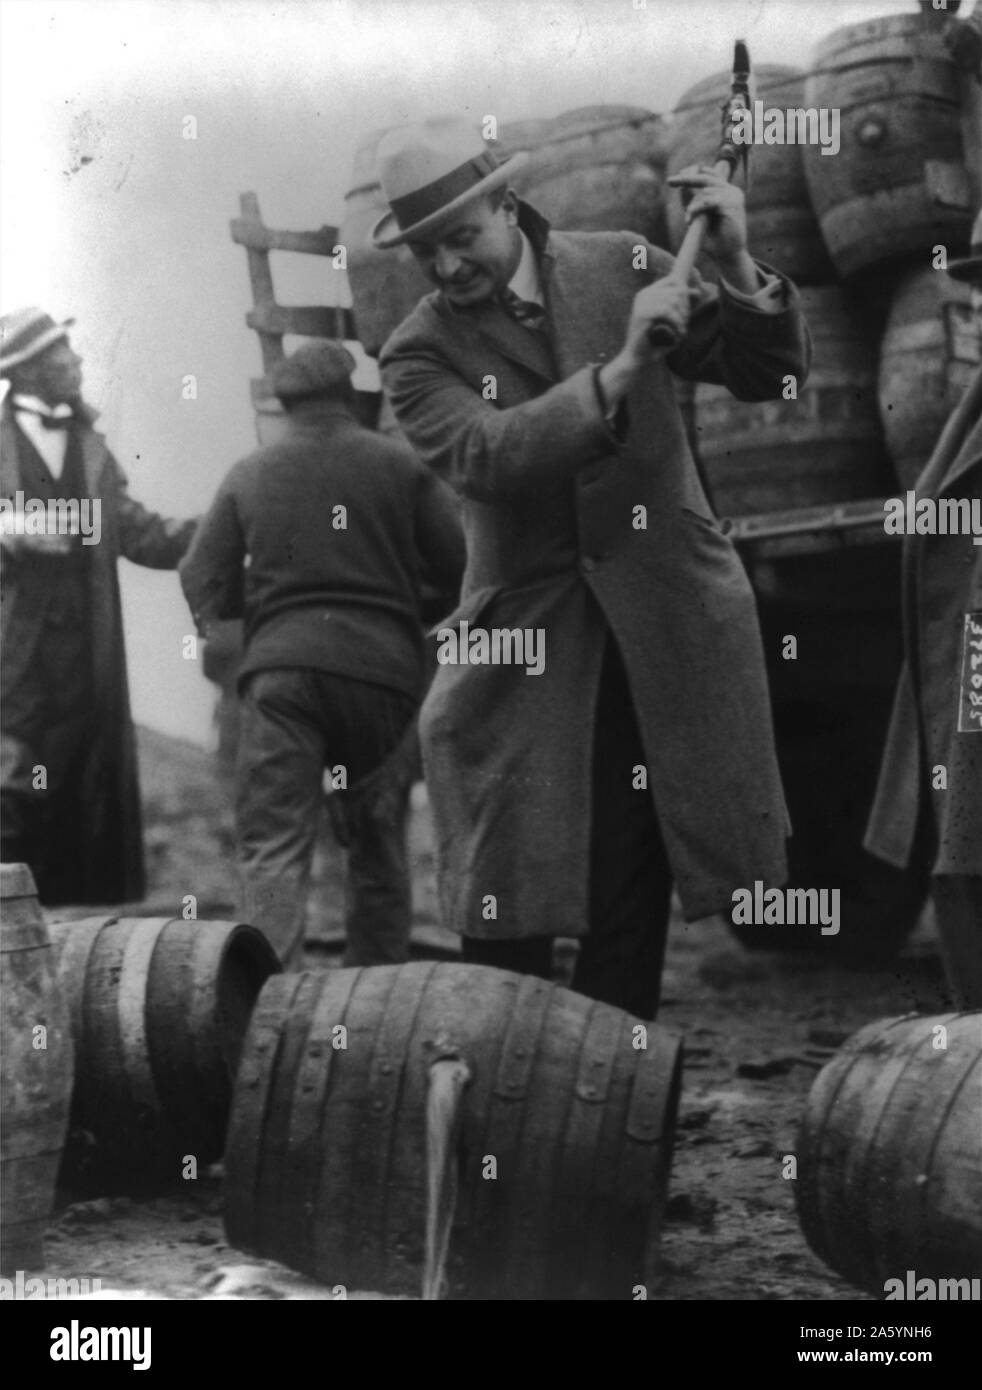 FBI Officer breaks a confiscated barrel of beer as part of the prohibition campaign against alcohol in the USA in the 1920's. Date 1924. Stock Photo